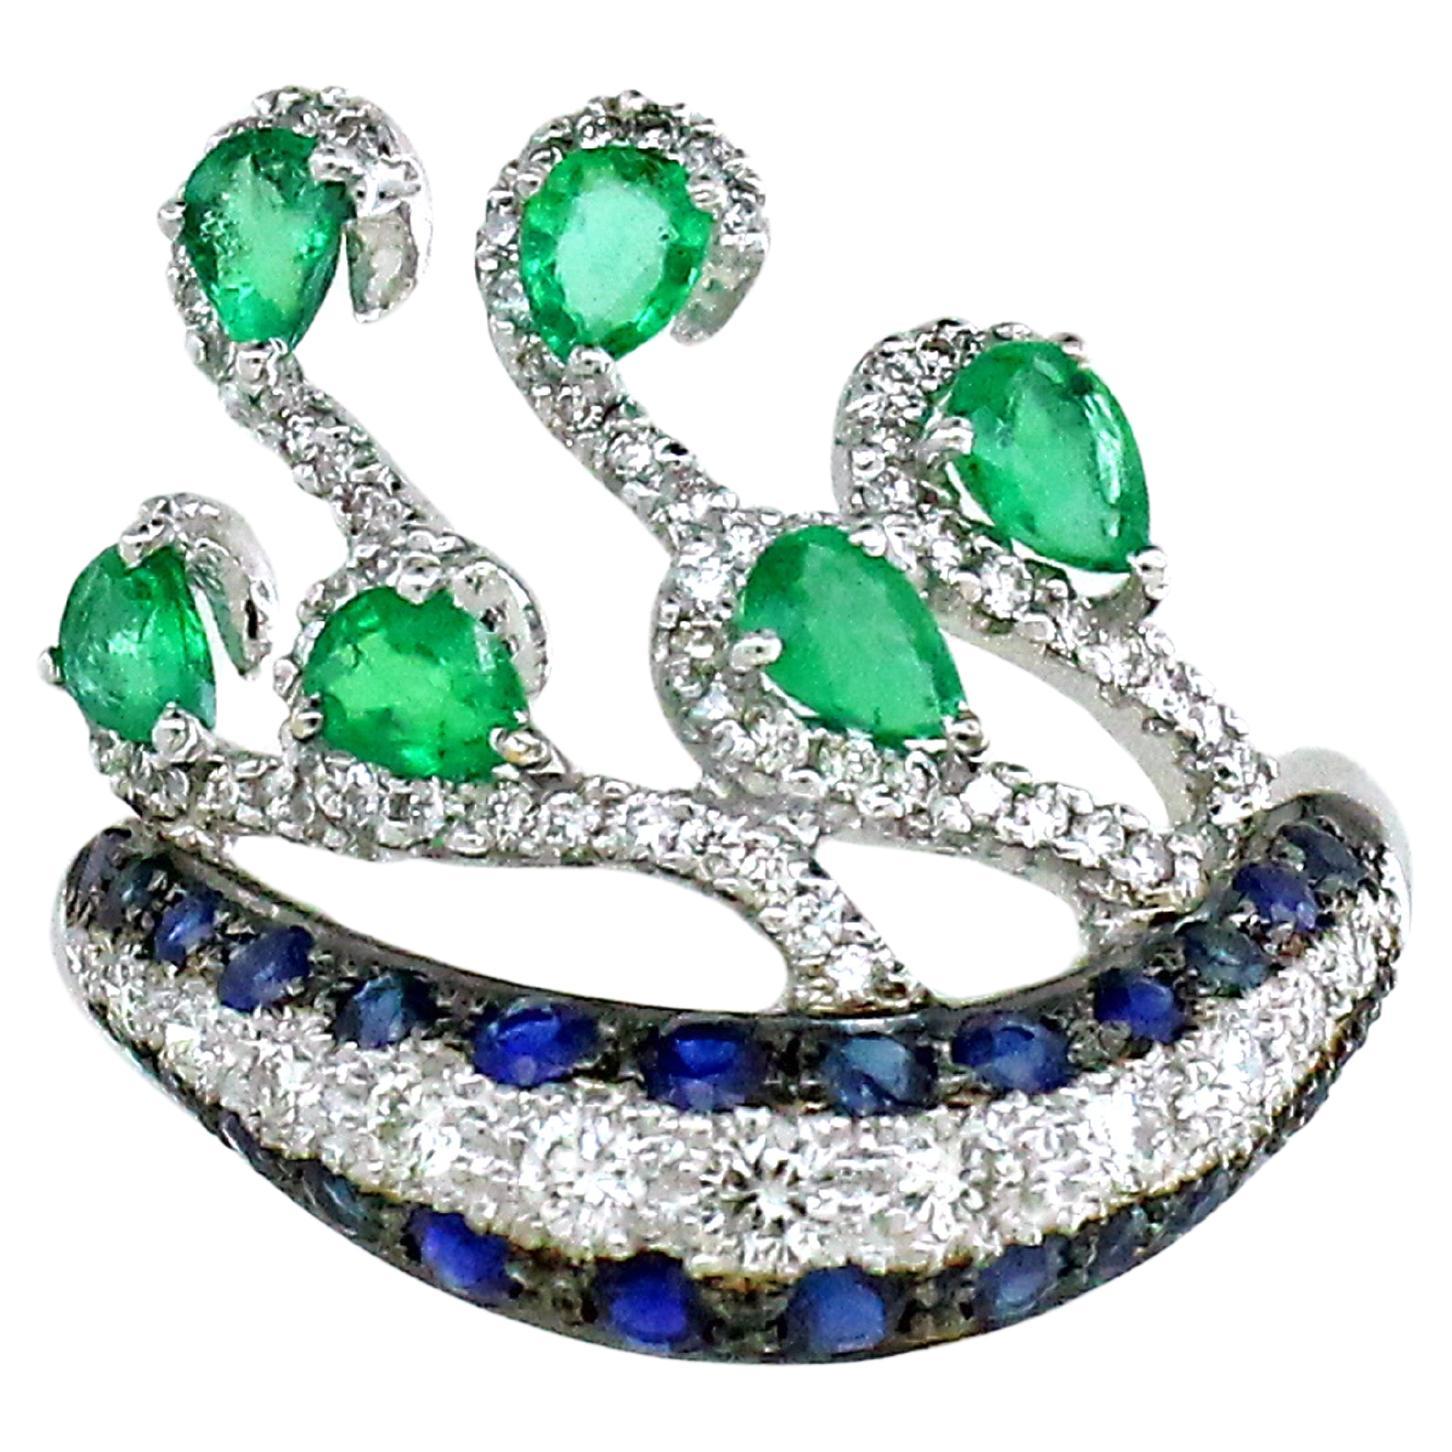 0.83 carats Emerald and 0.76 Sapphire ring 